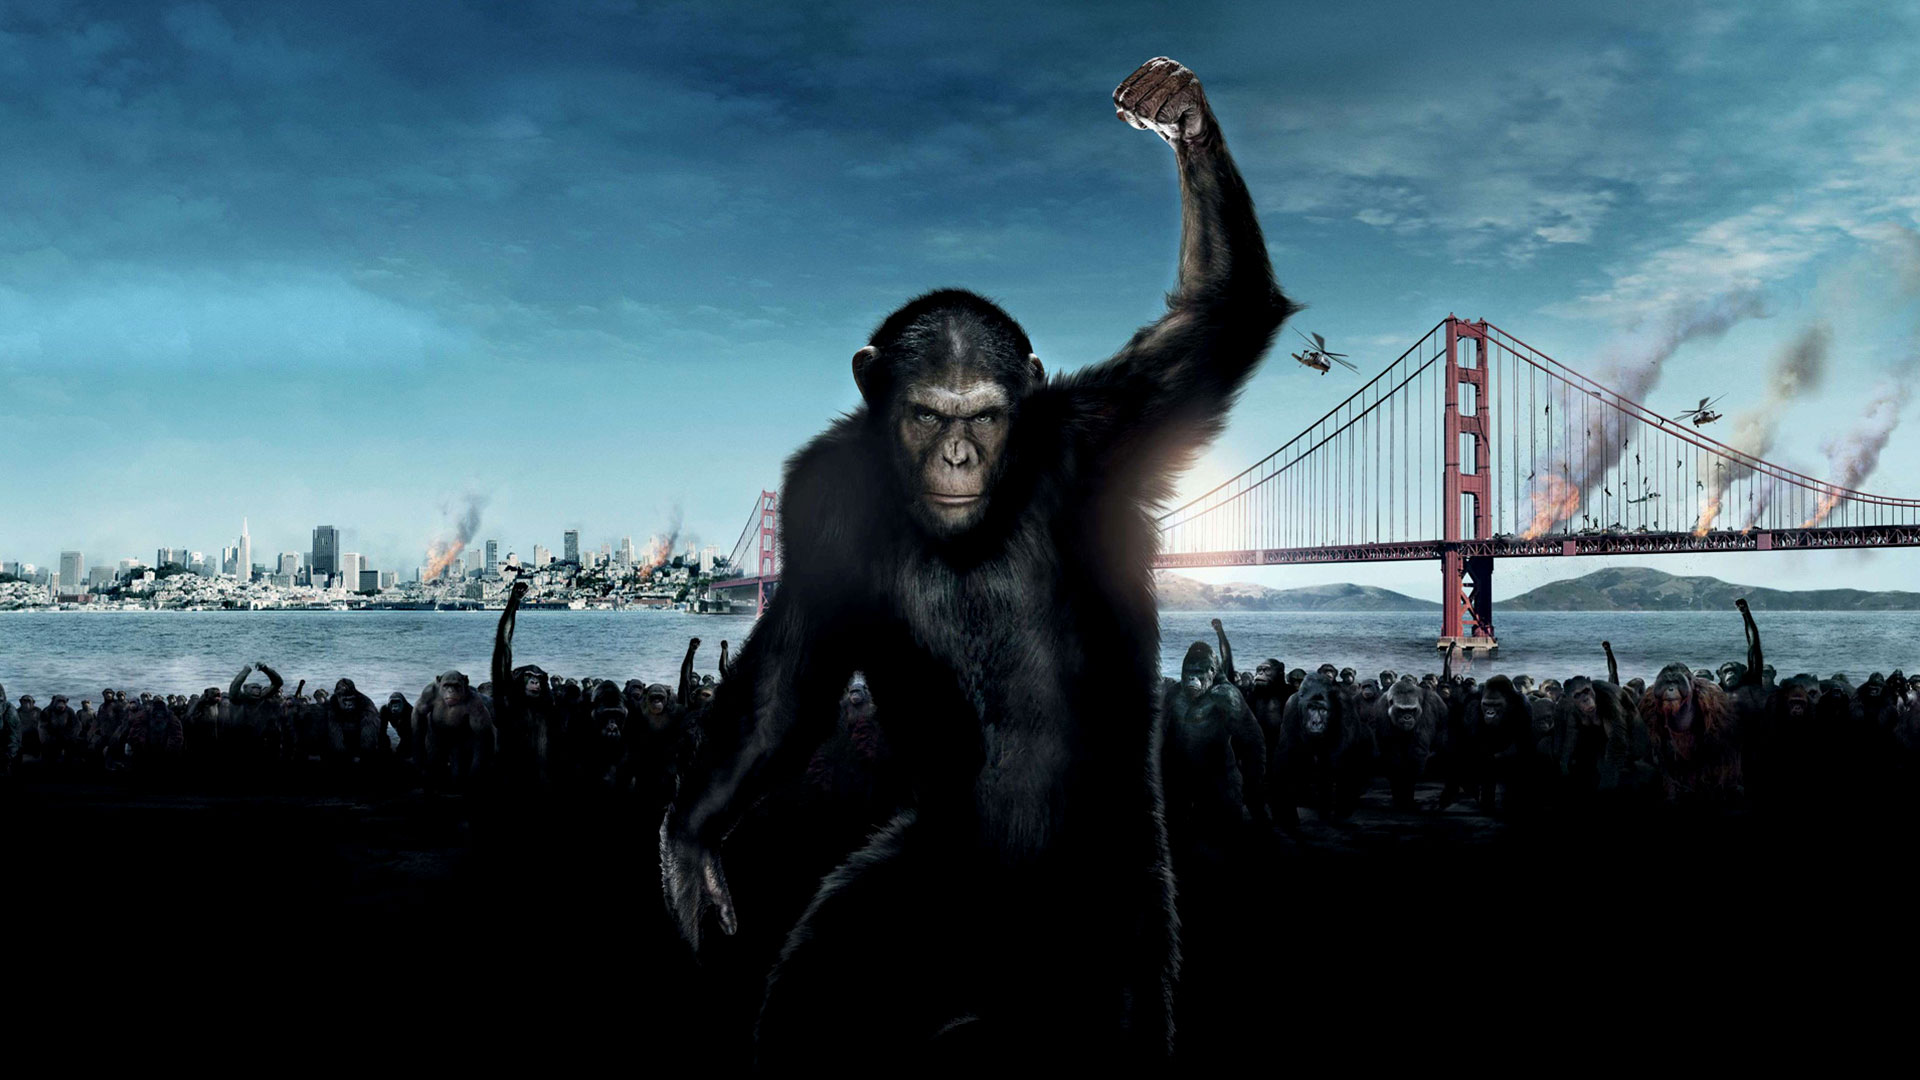 Movie Rise Of The Planet Of The Apes HD Wallpaper | Background Image